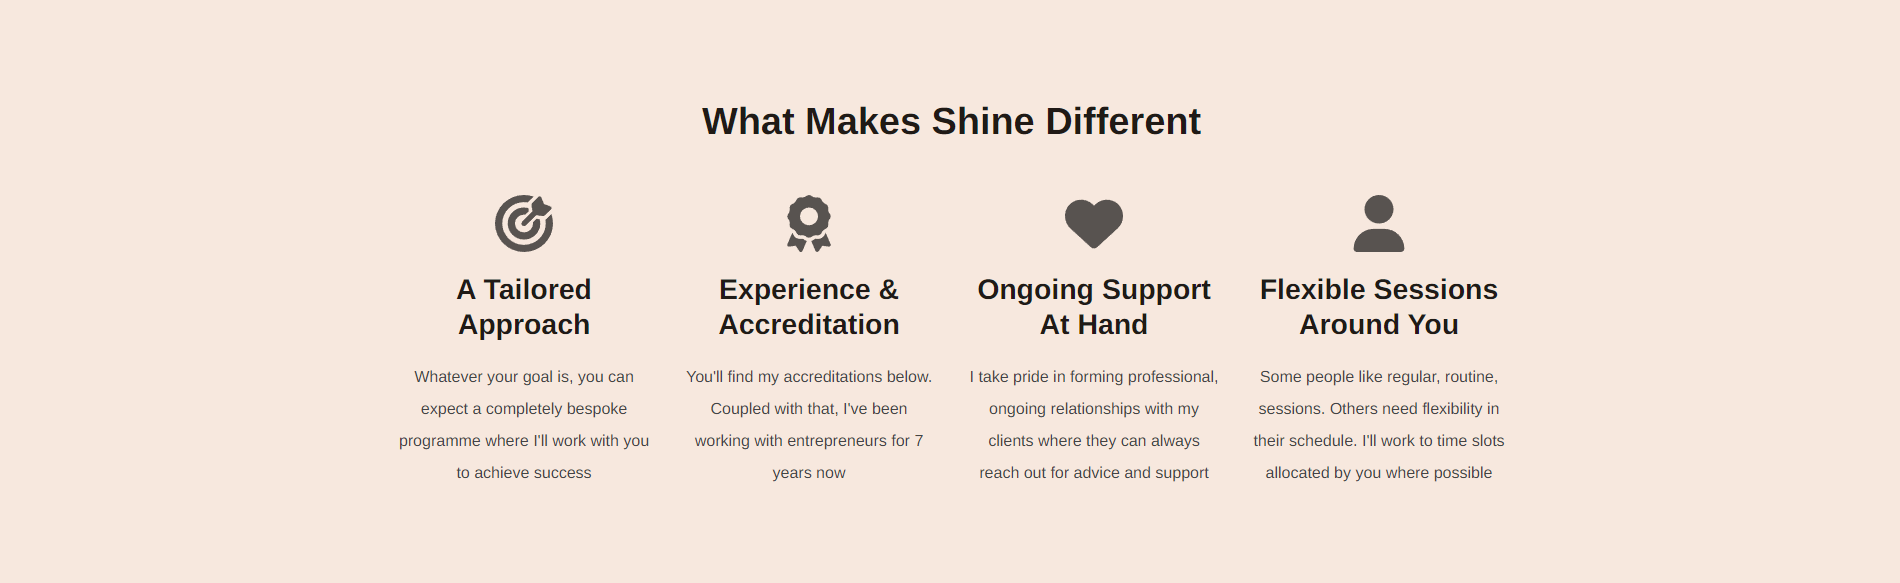 Shine Icon Block Featuring Unique Selling Points